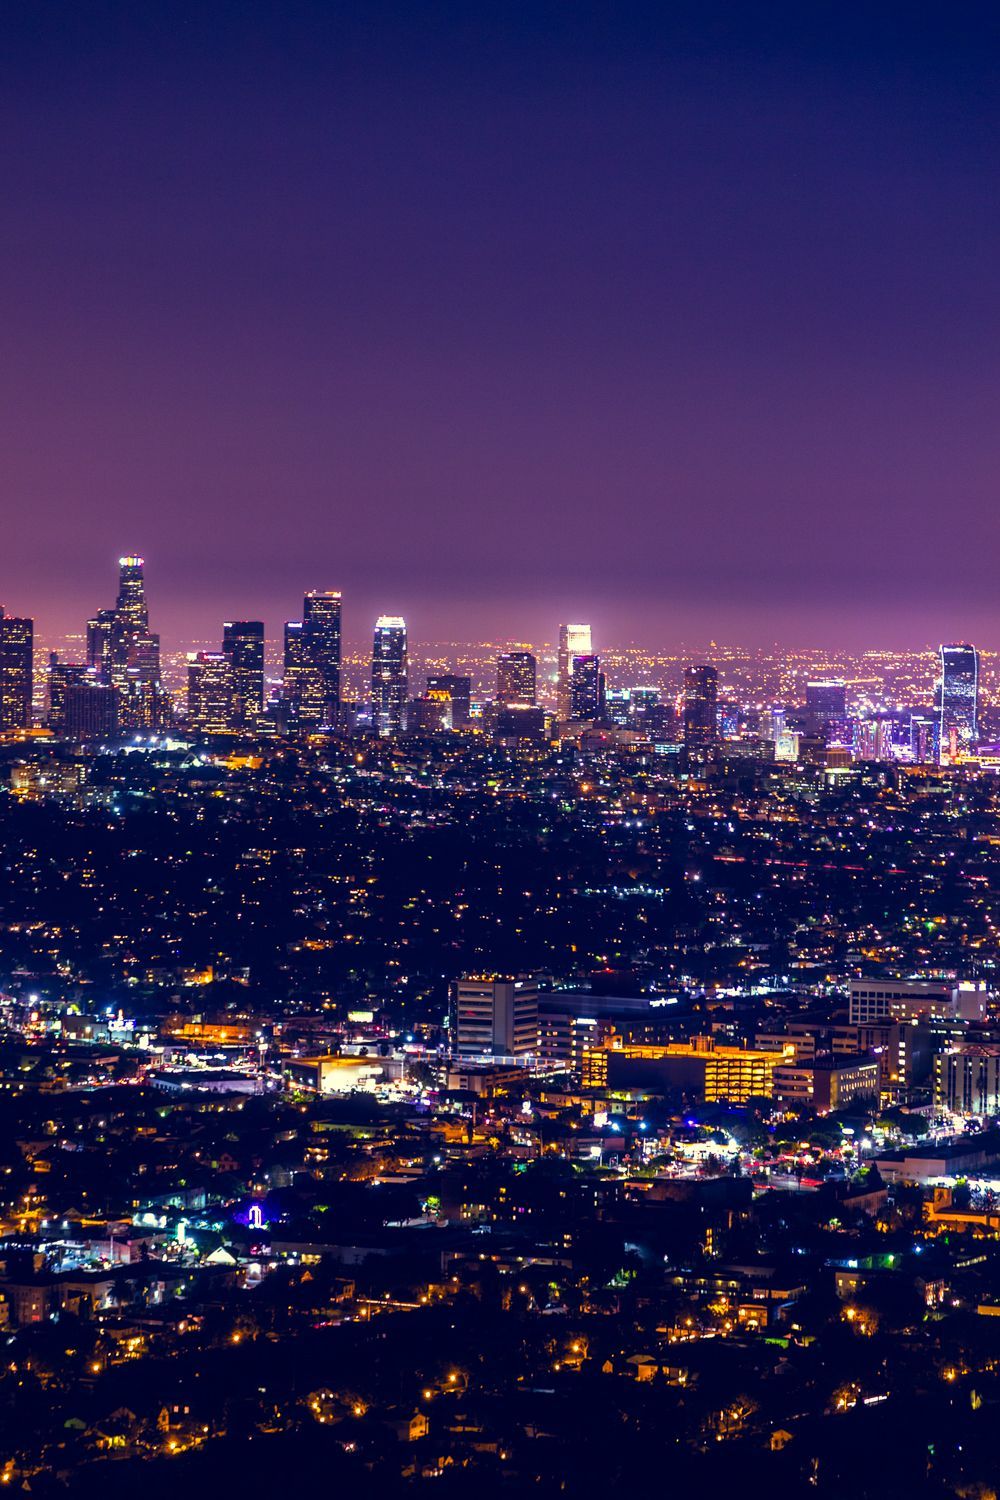 North Sky Photography. Los angeles at night, City lights at night, City aesthetic